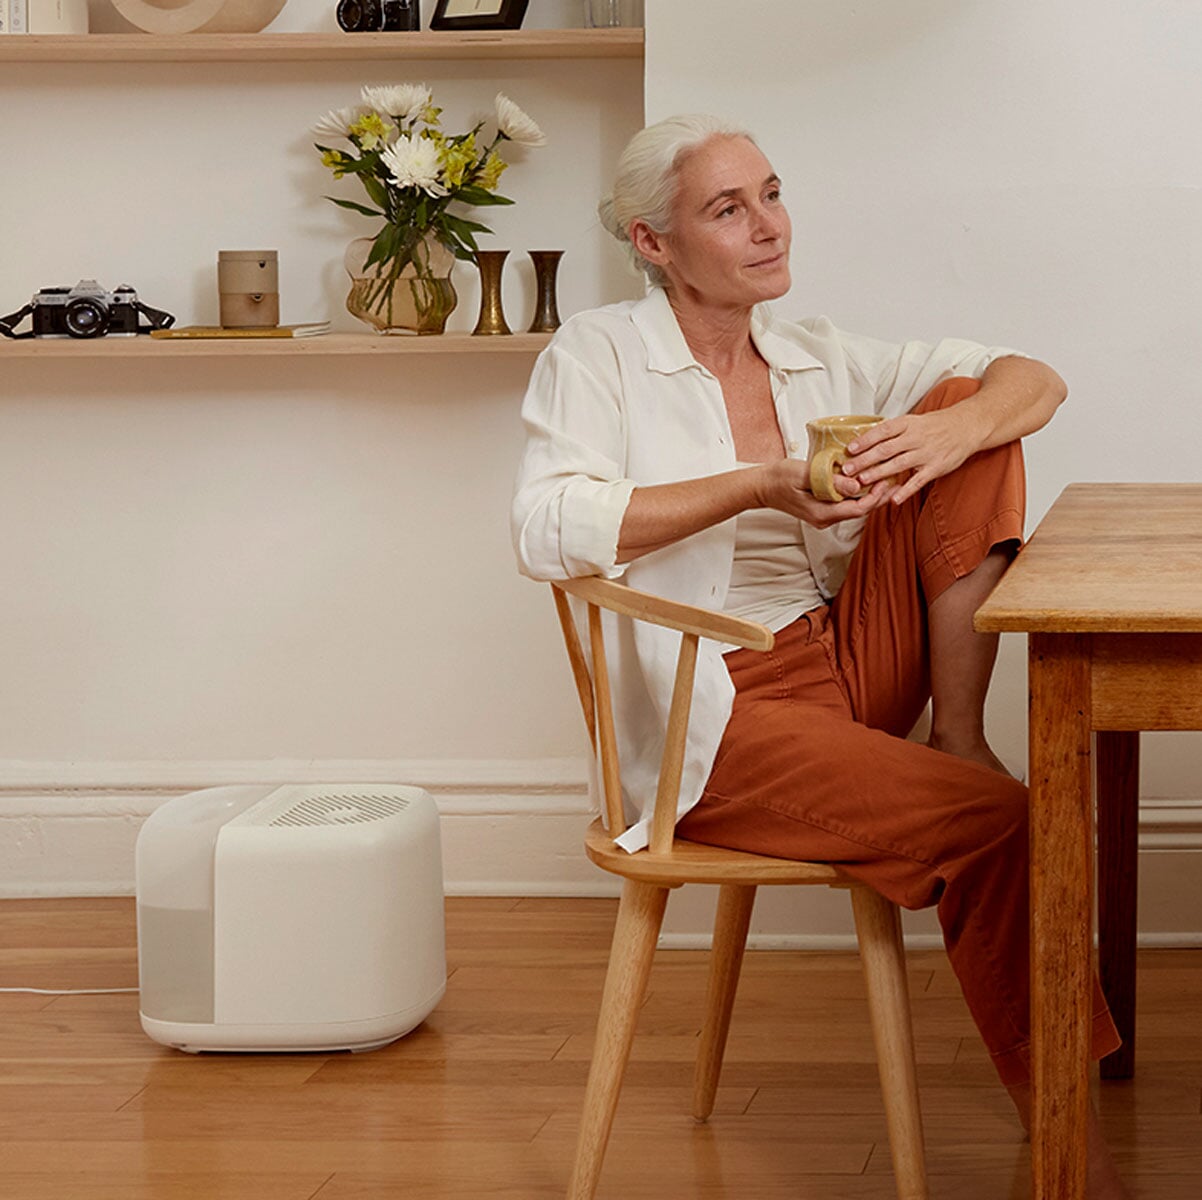 Large Room Humidifier | Lifestyle, Woman sitting at a table next to device placed on ground